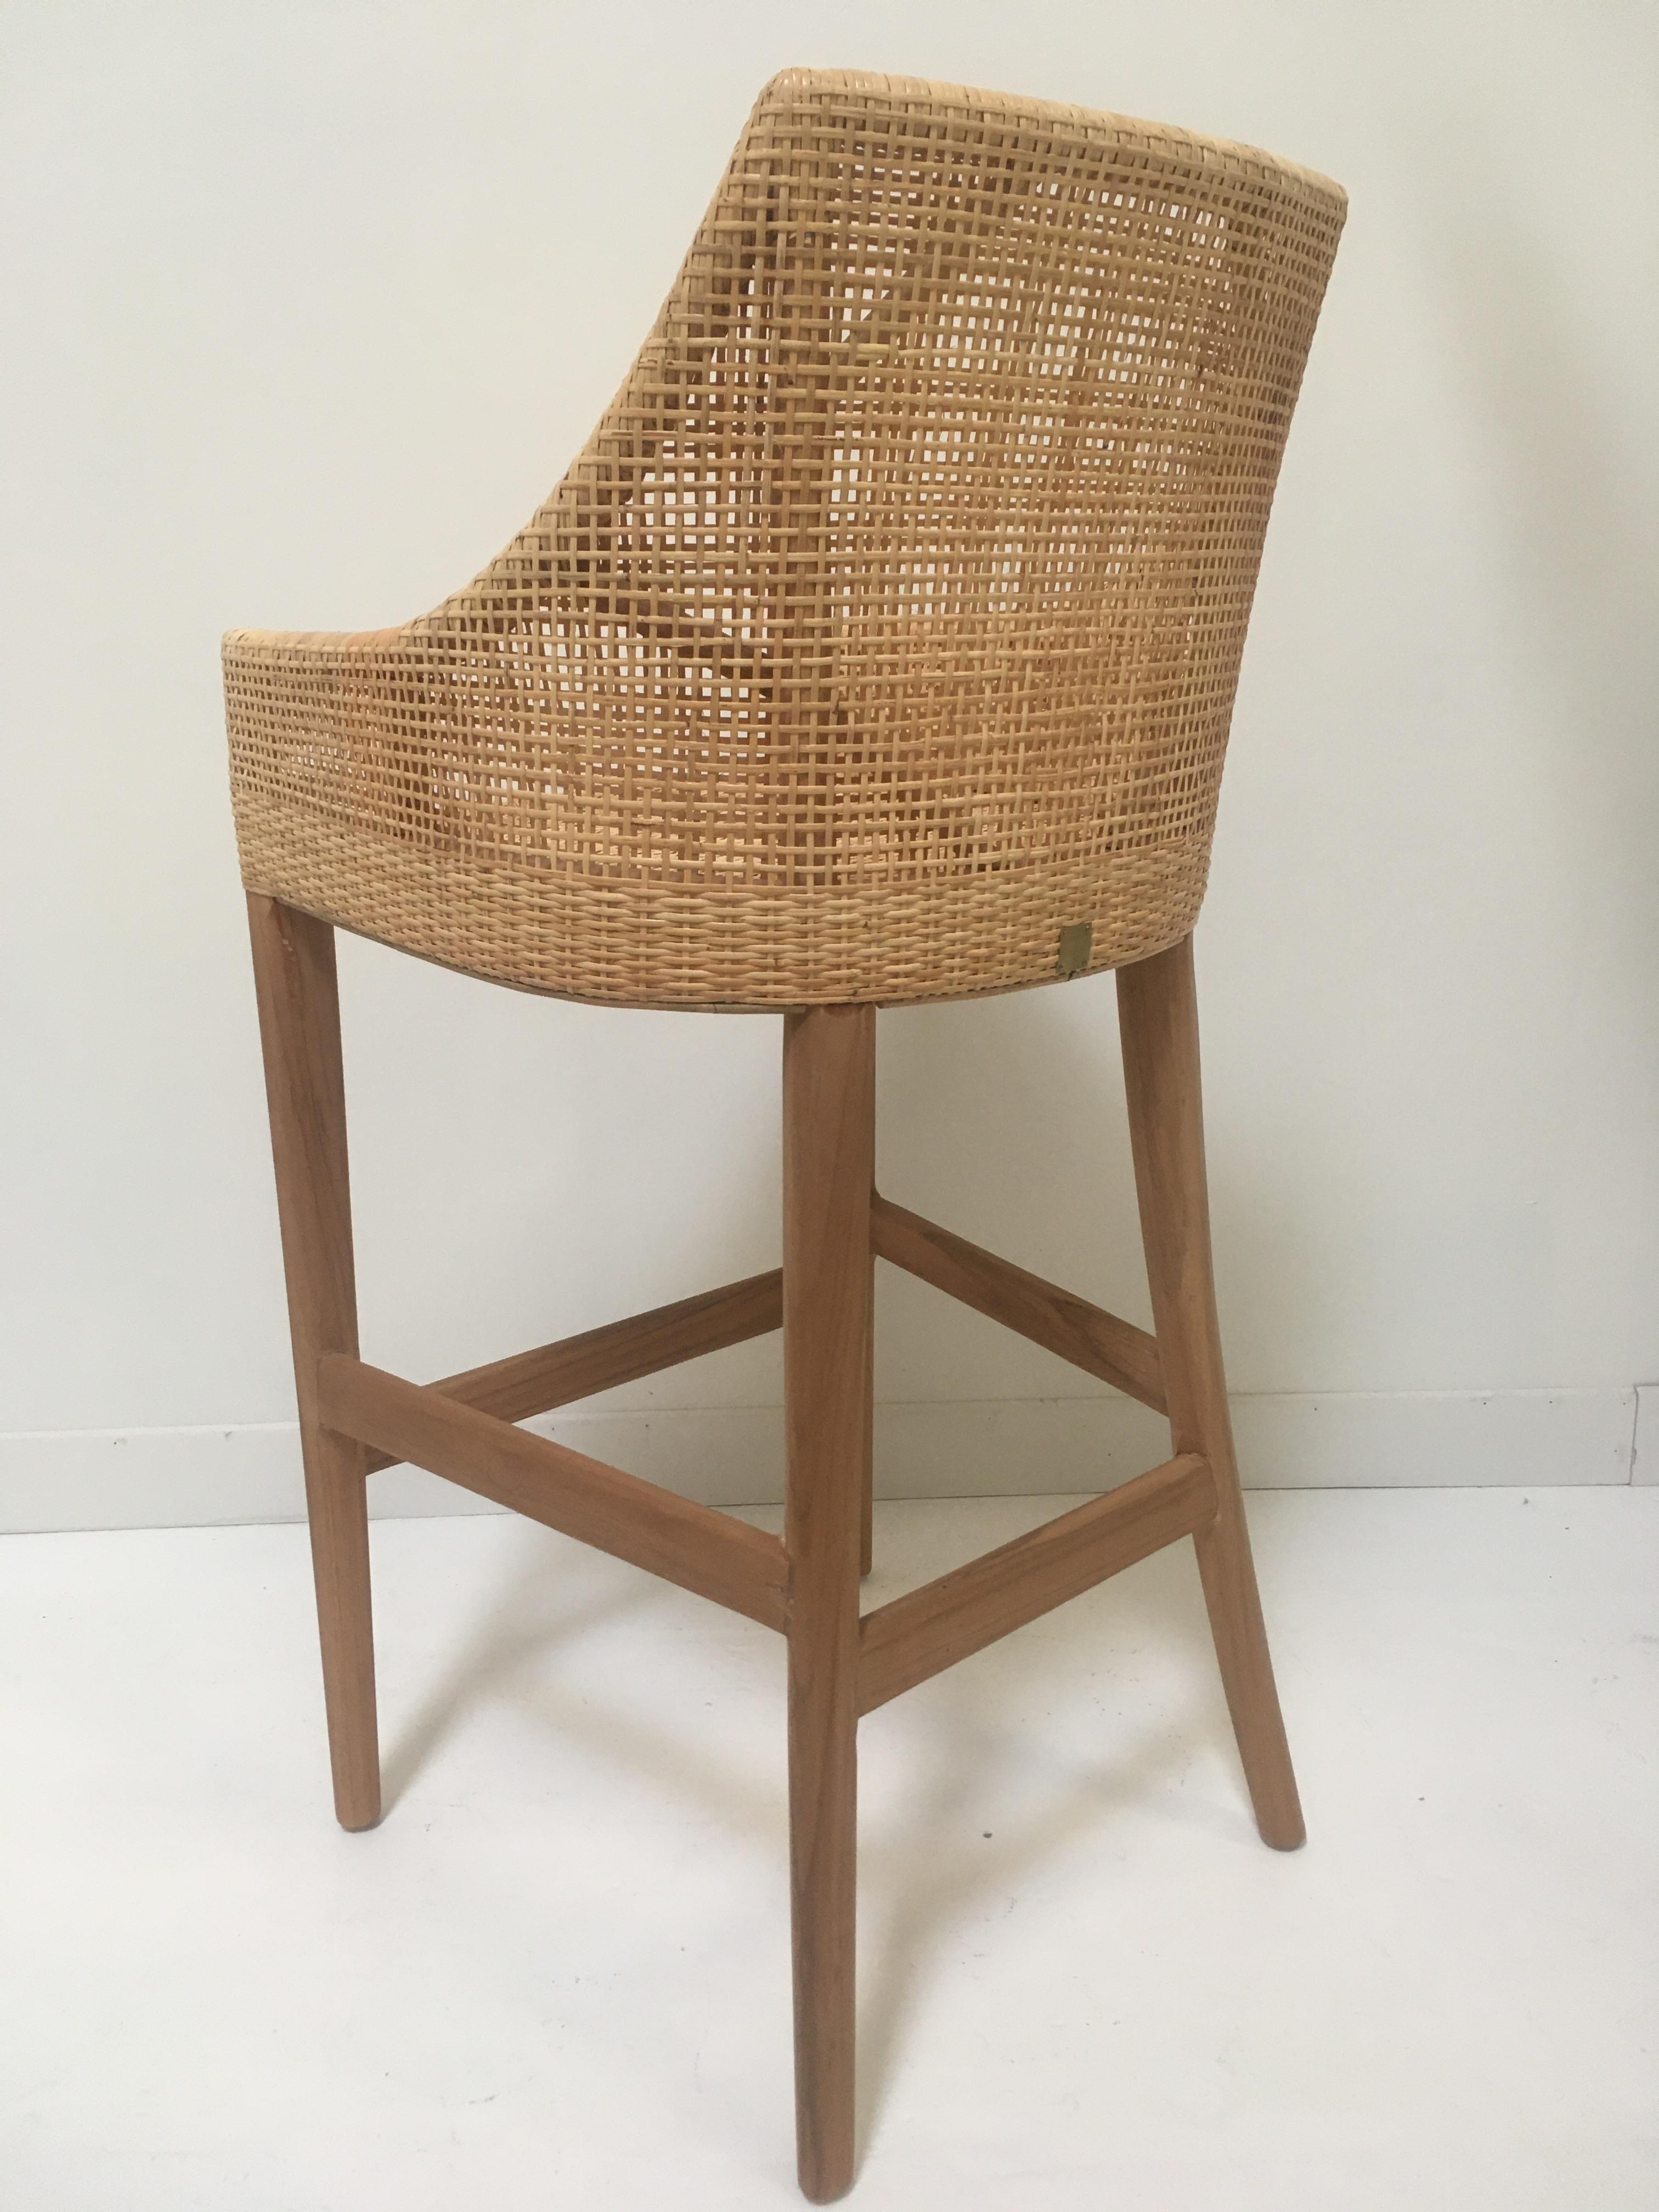 Elegant rattan bar stool with a structure in teak wooden and handcrafted braided rattan combining quality, robustness and class. Comfortable and ergonomic, aerial and poetic. The armrests height is 82cm and the seat height is 71cm. In excellent